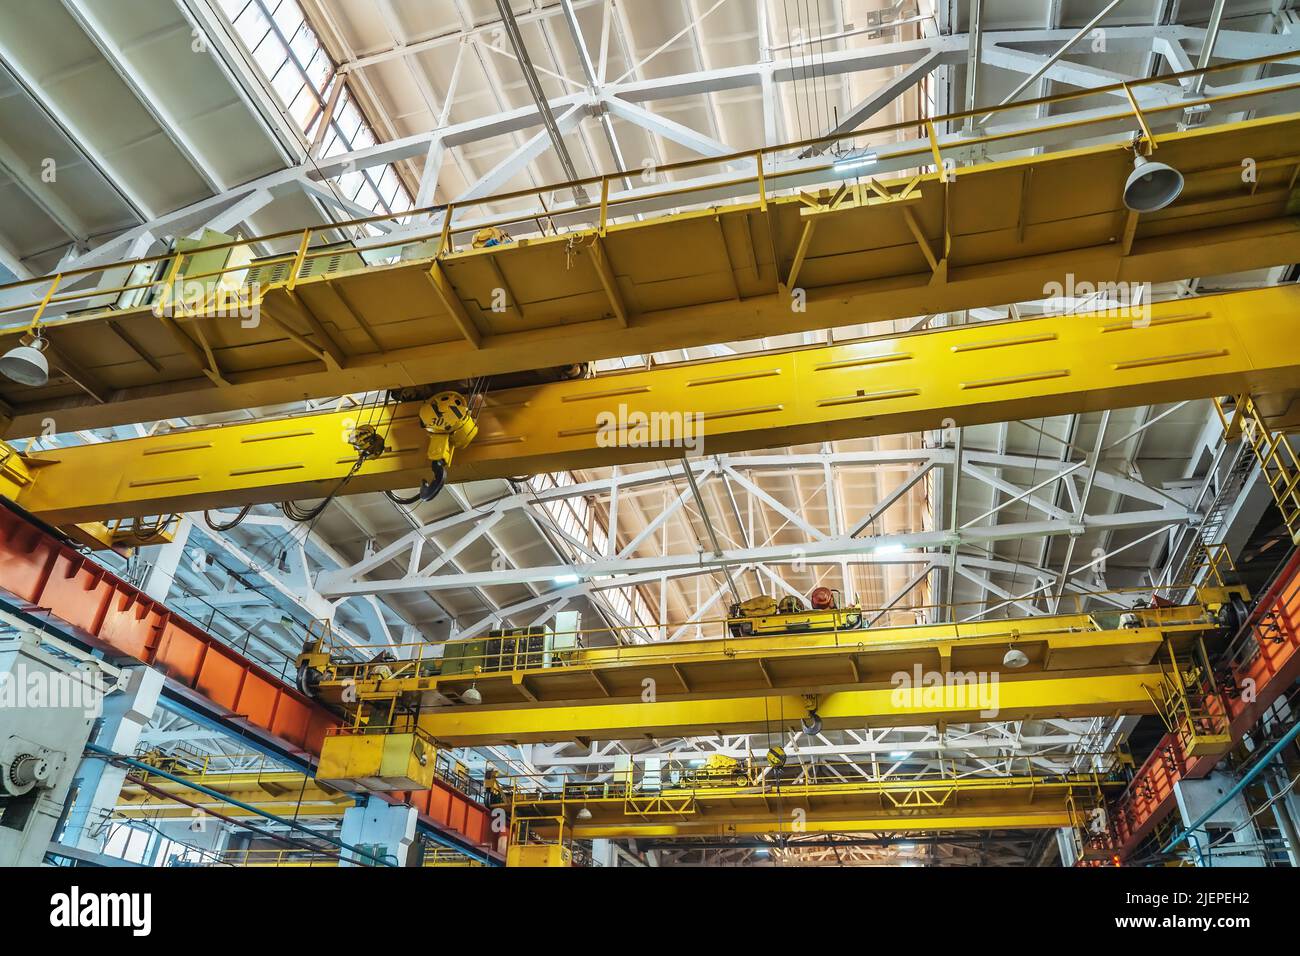 Beam cranes inside an industrial metal manufacturing plant. Stock Photo